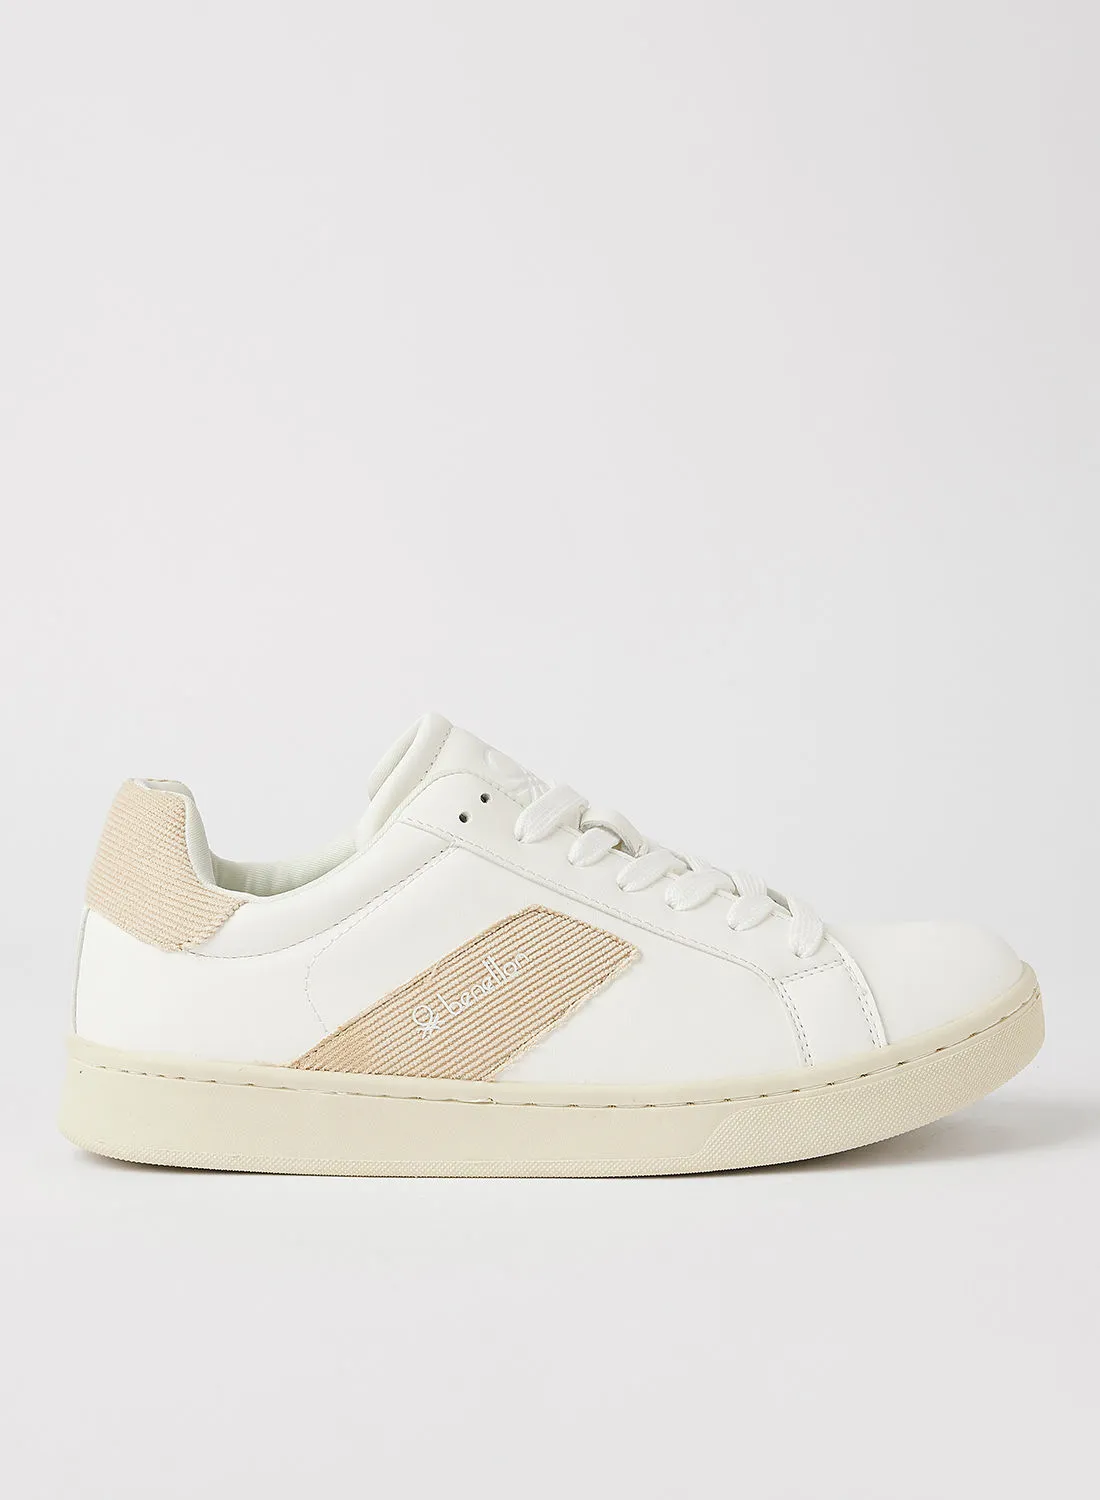 UNITED COLORS OF BENETTON Walk 2.0 Vlx Sneakers White/Beige